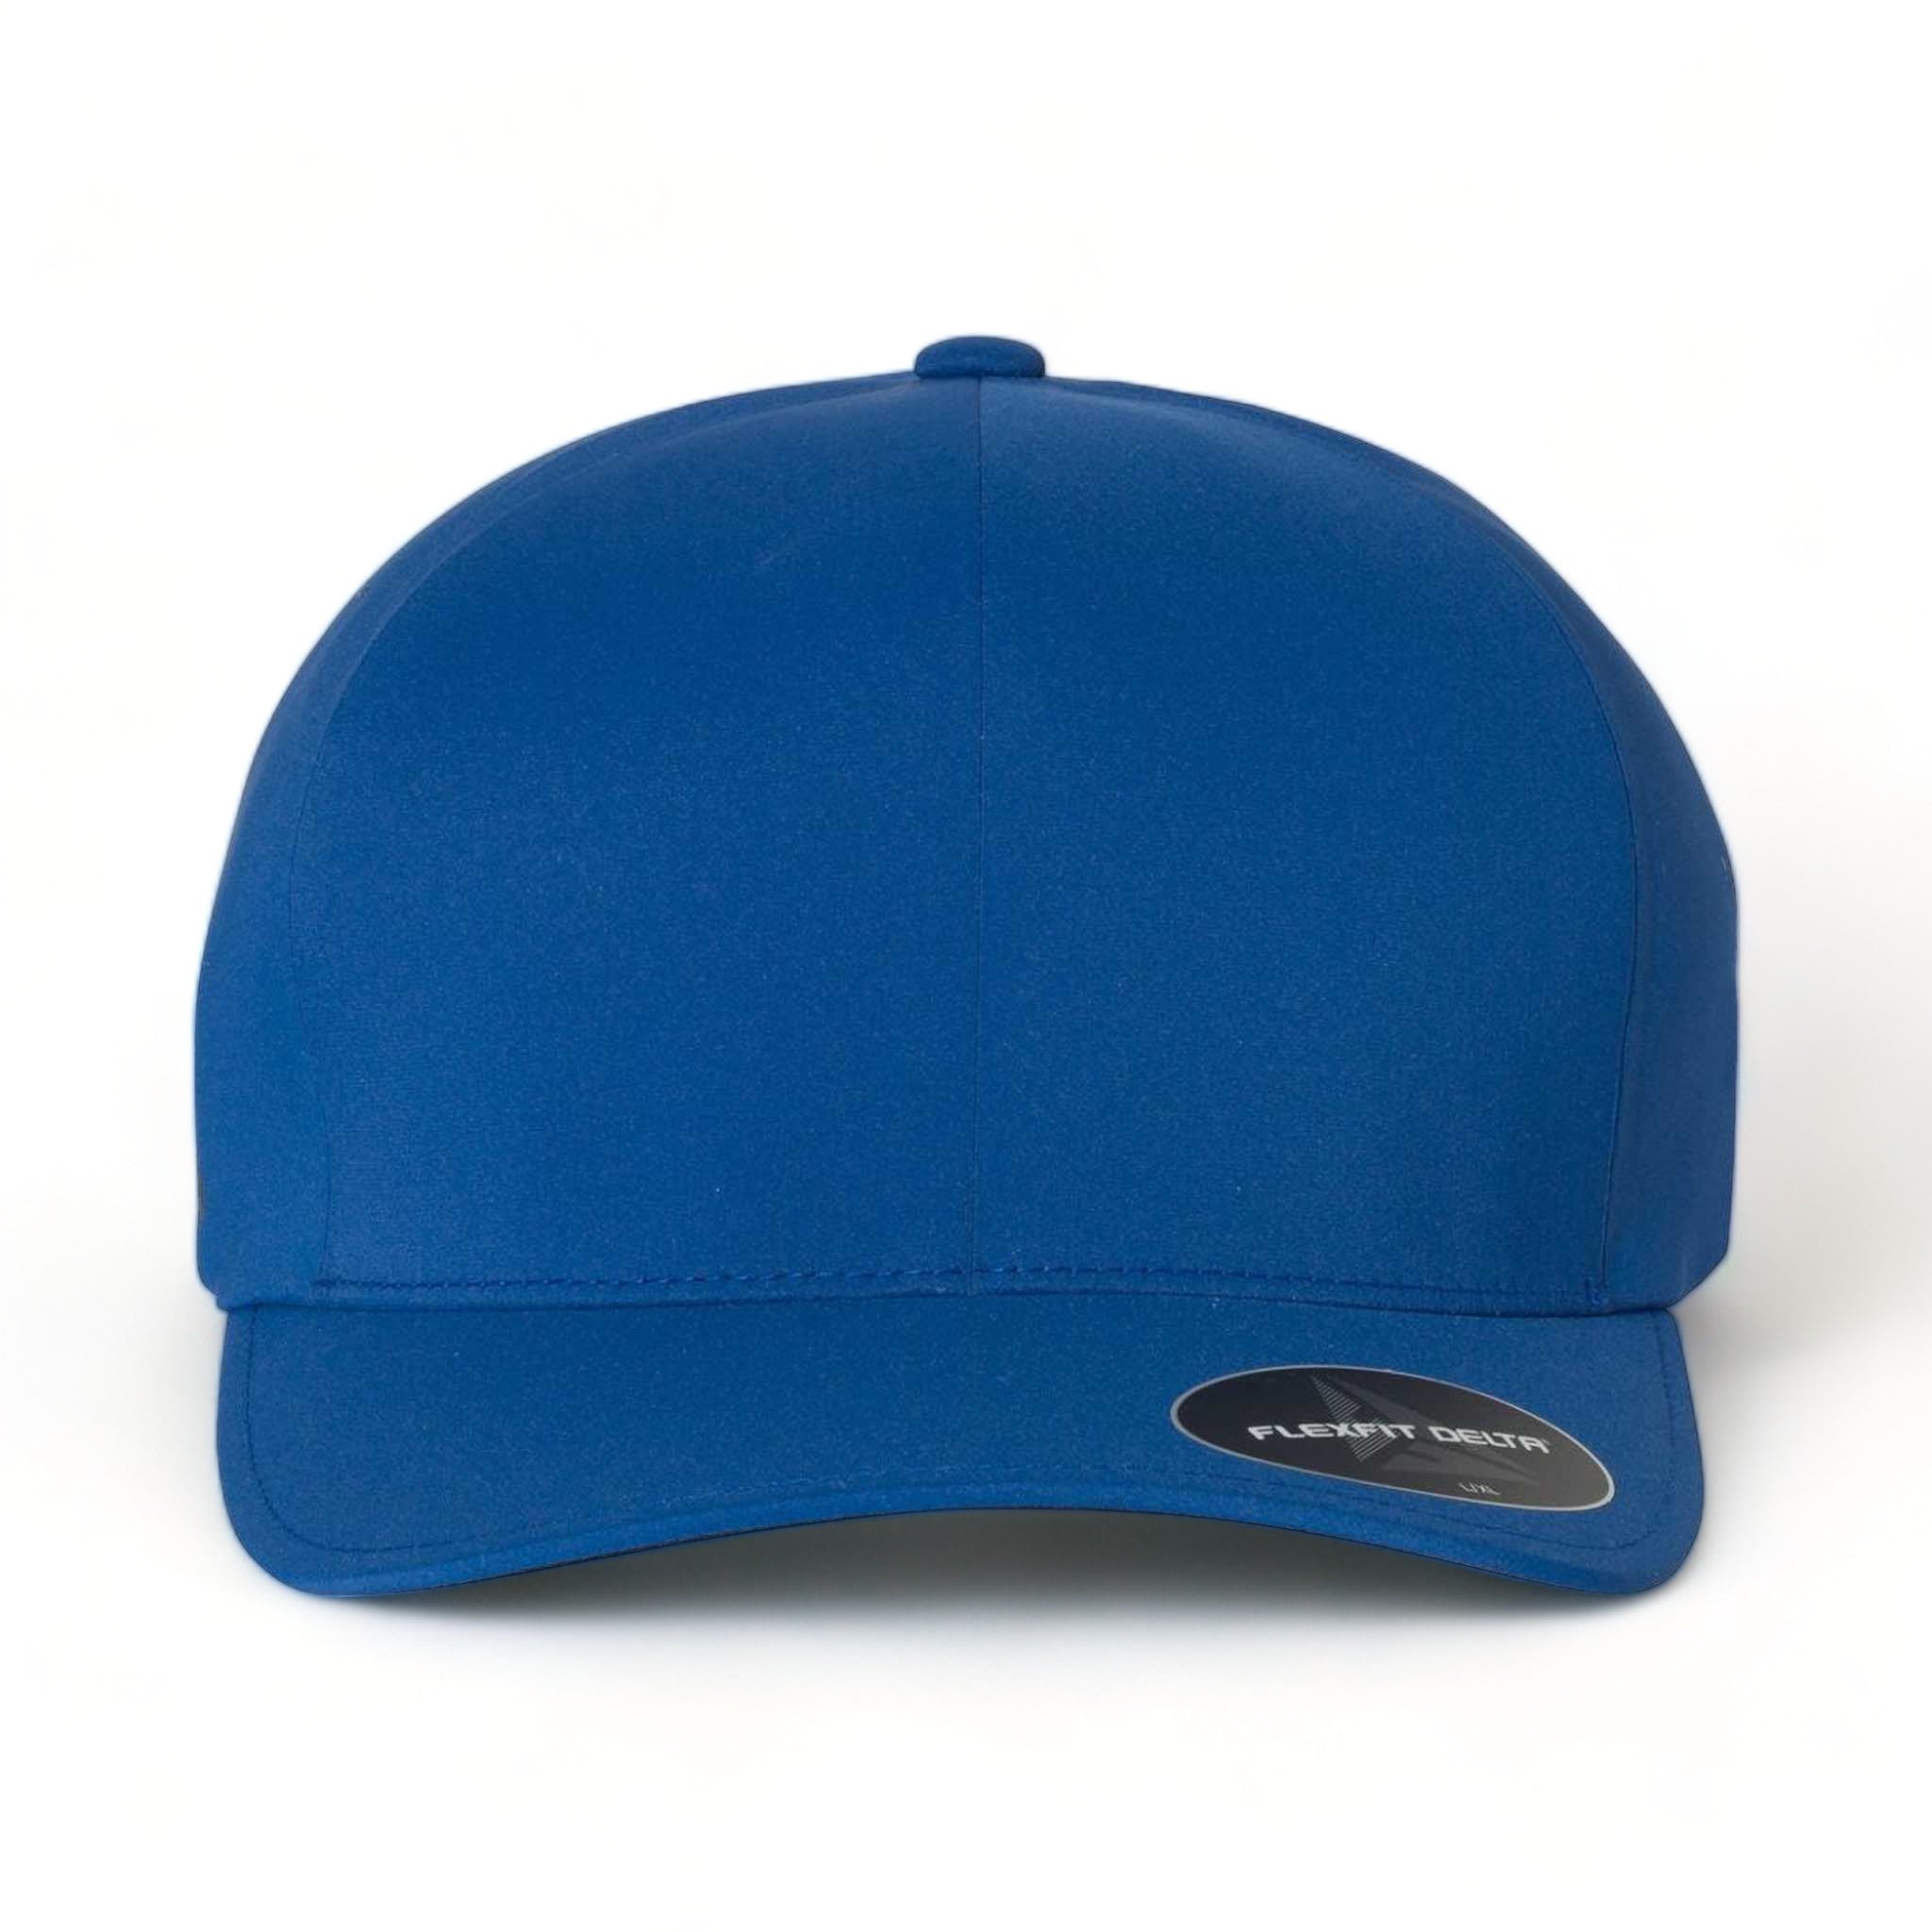 Front view of Flexfit 180 custom hat in royal